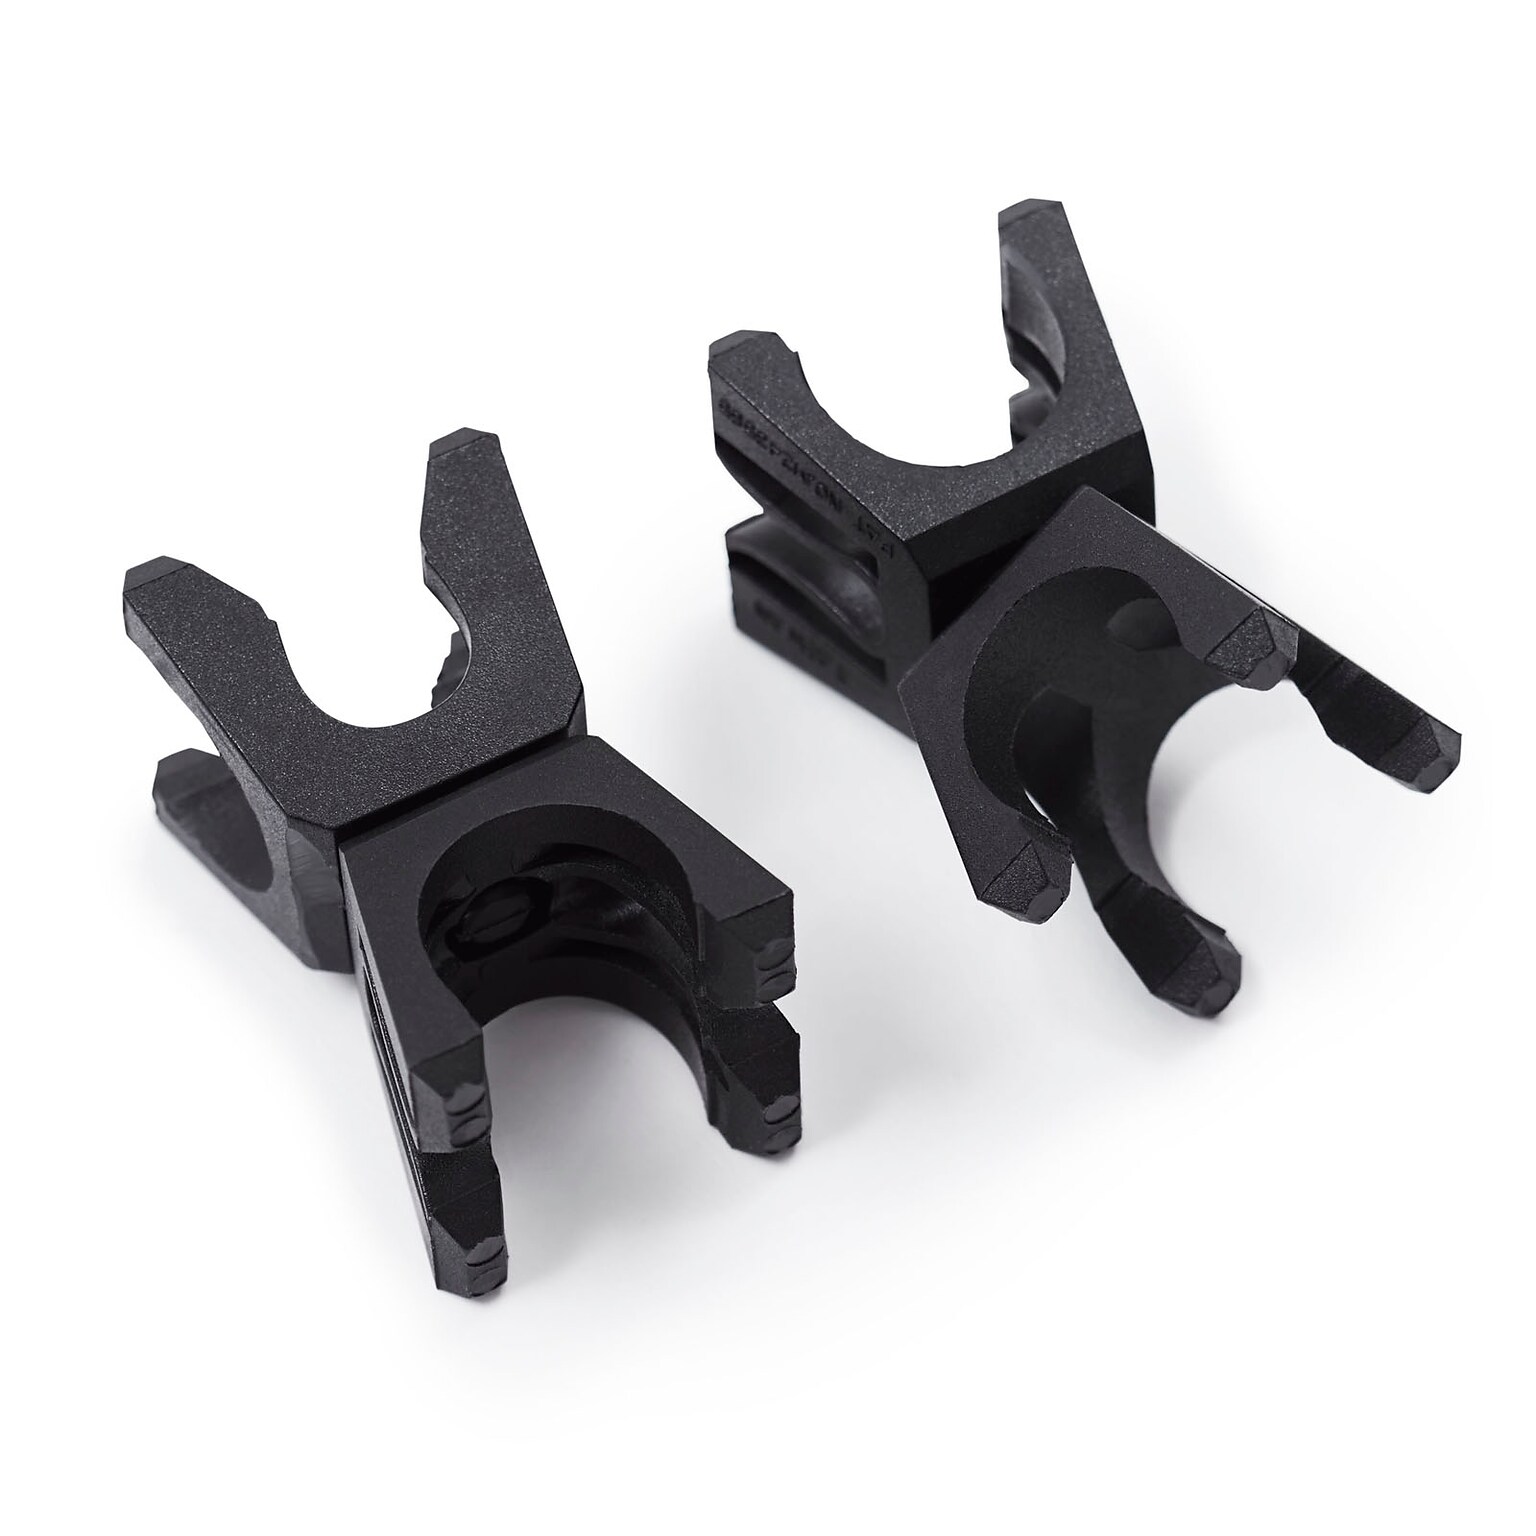 GONGE Build N Balance Joints, Black, Pack of 2 (WING2255)